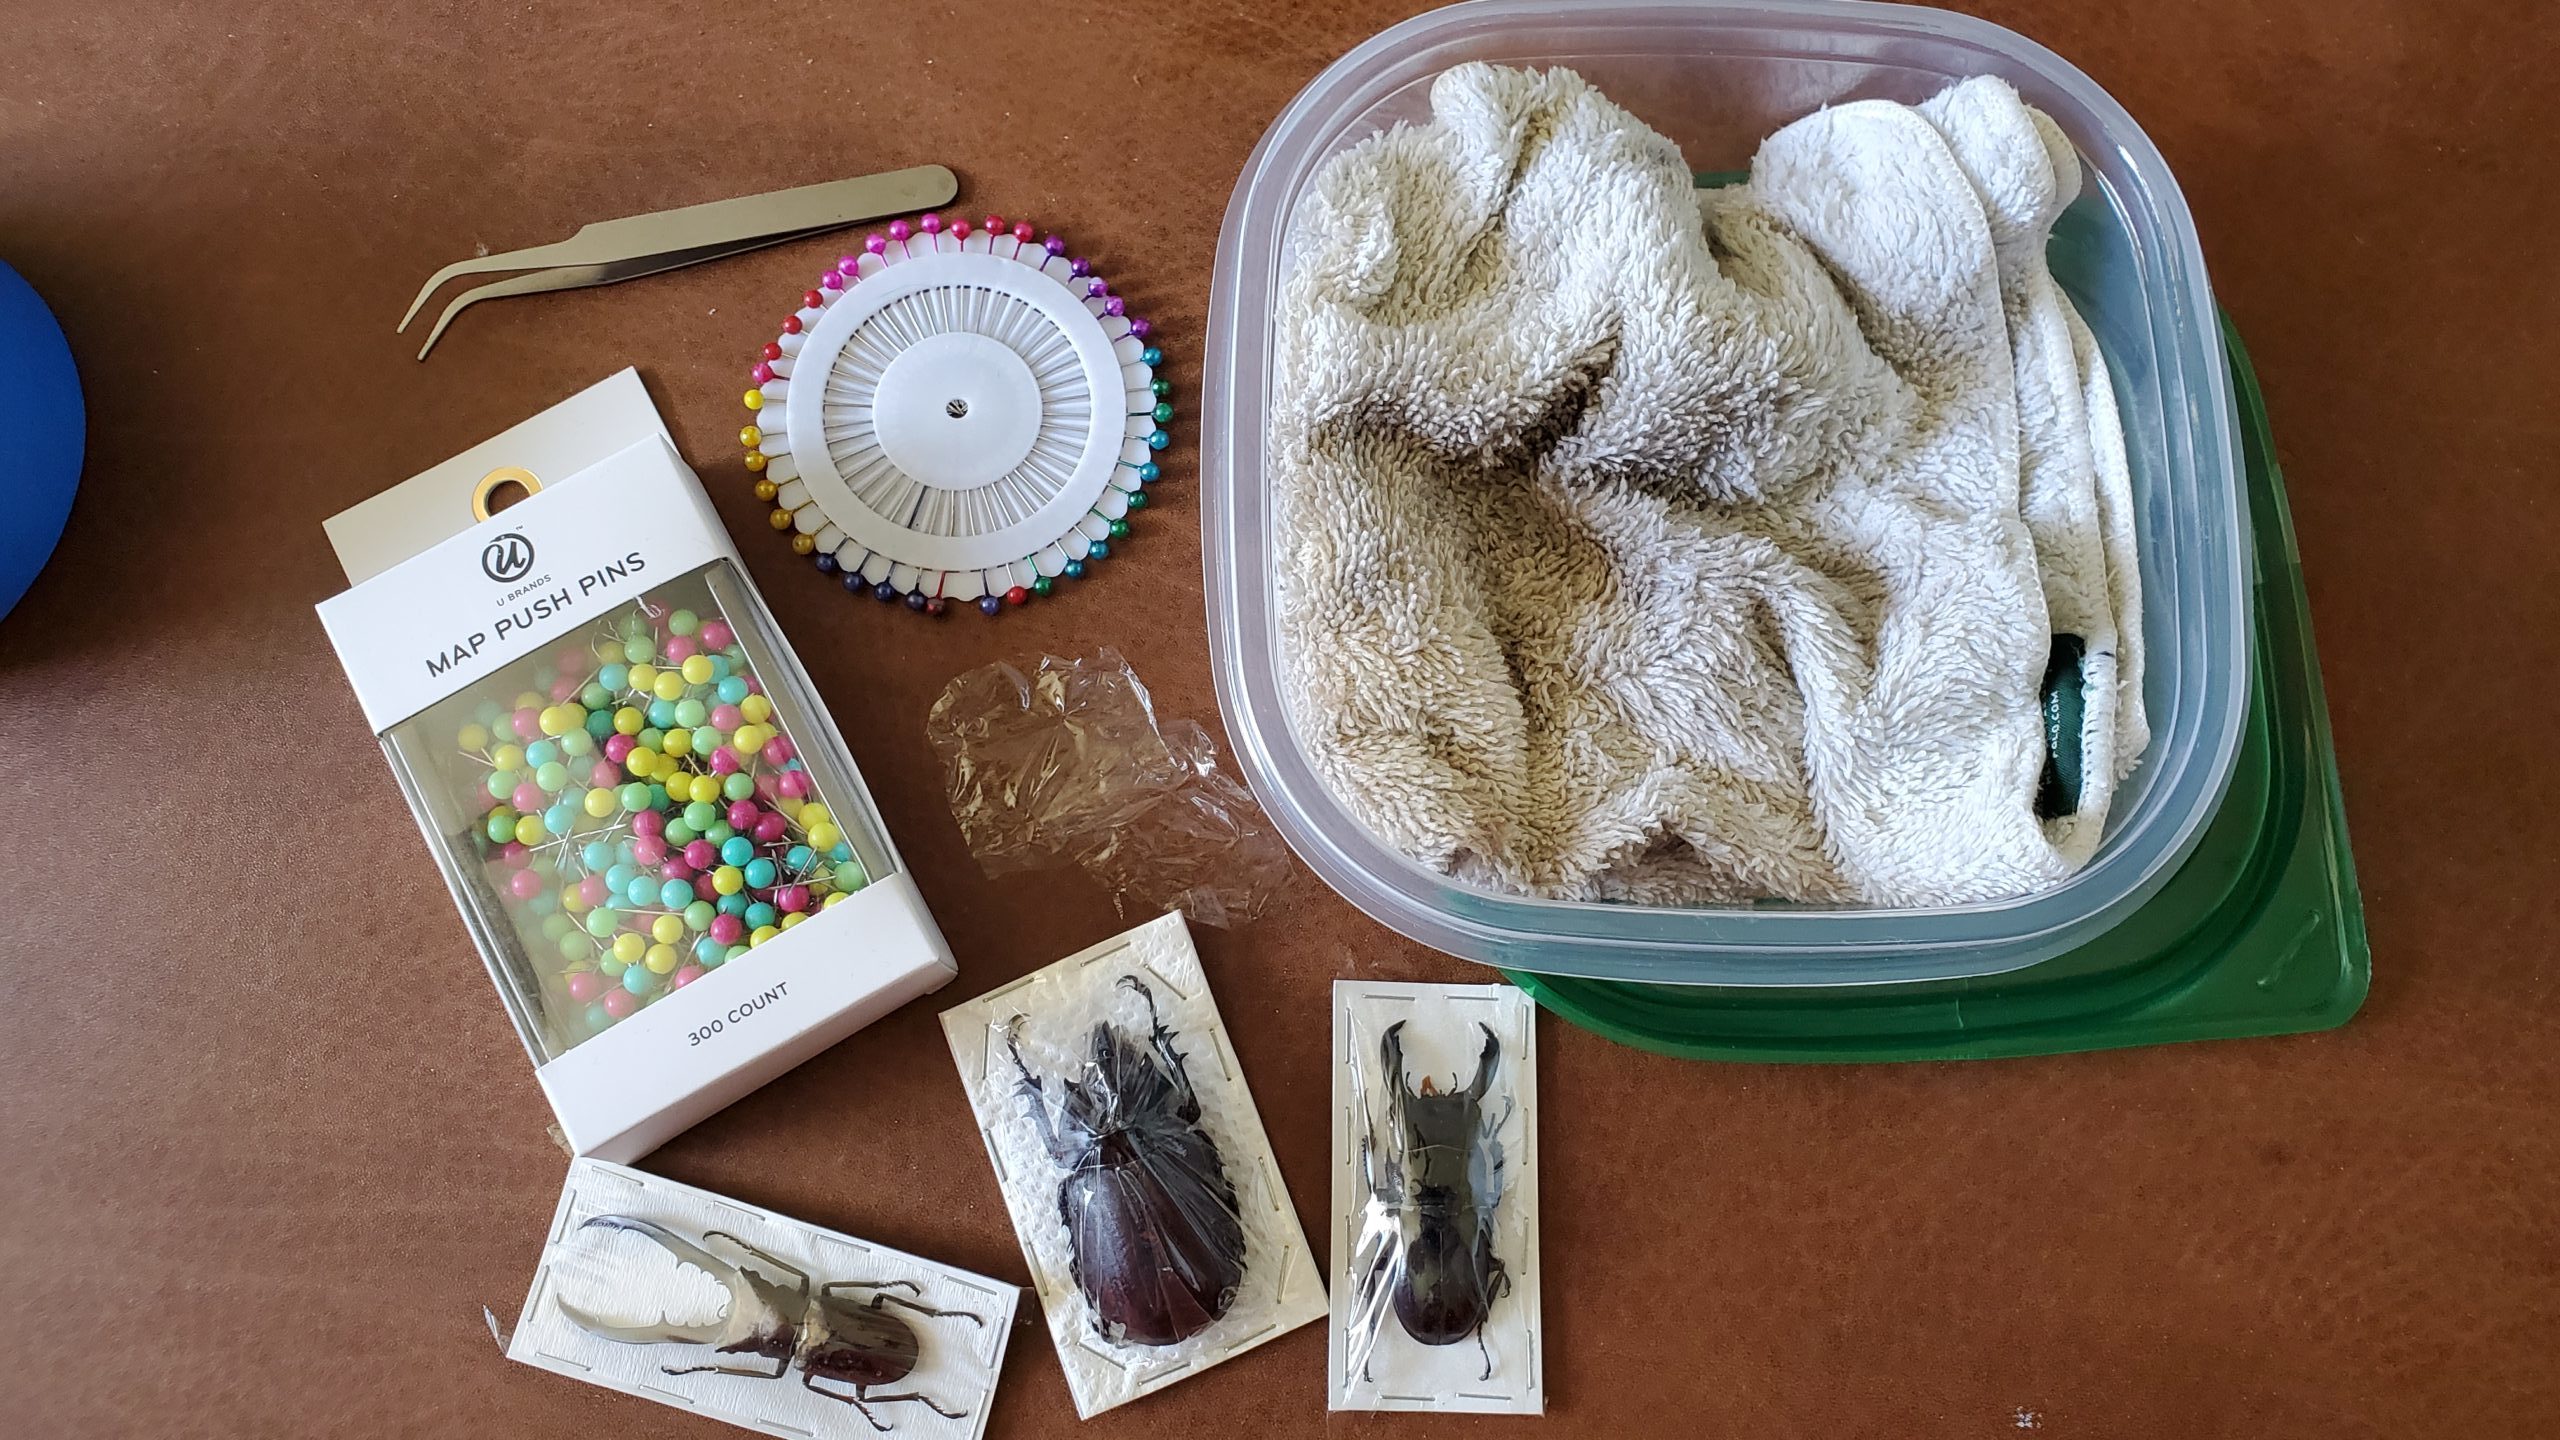 supplies photo including a small plastic container with a cloth inside, a ring of straight pins, a pair of tweezers, and 3 dried and preserved beetles